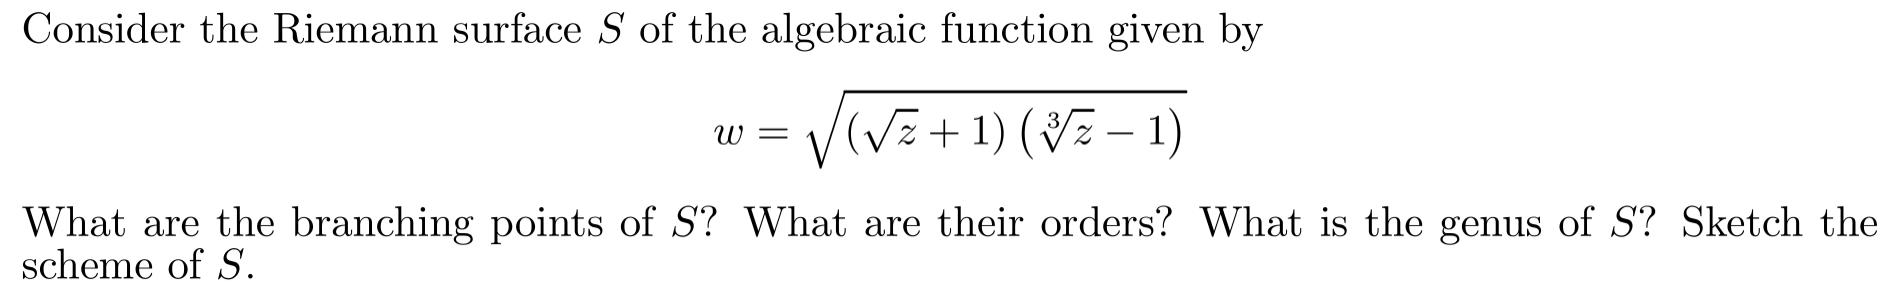 Consider the Riemann surface S of the algebraic function given by W= V(V2+1) (17 ? 1) What are the branching points of S? Wha